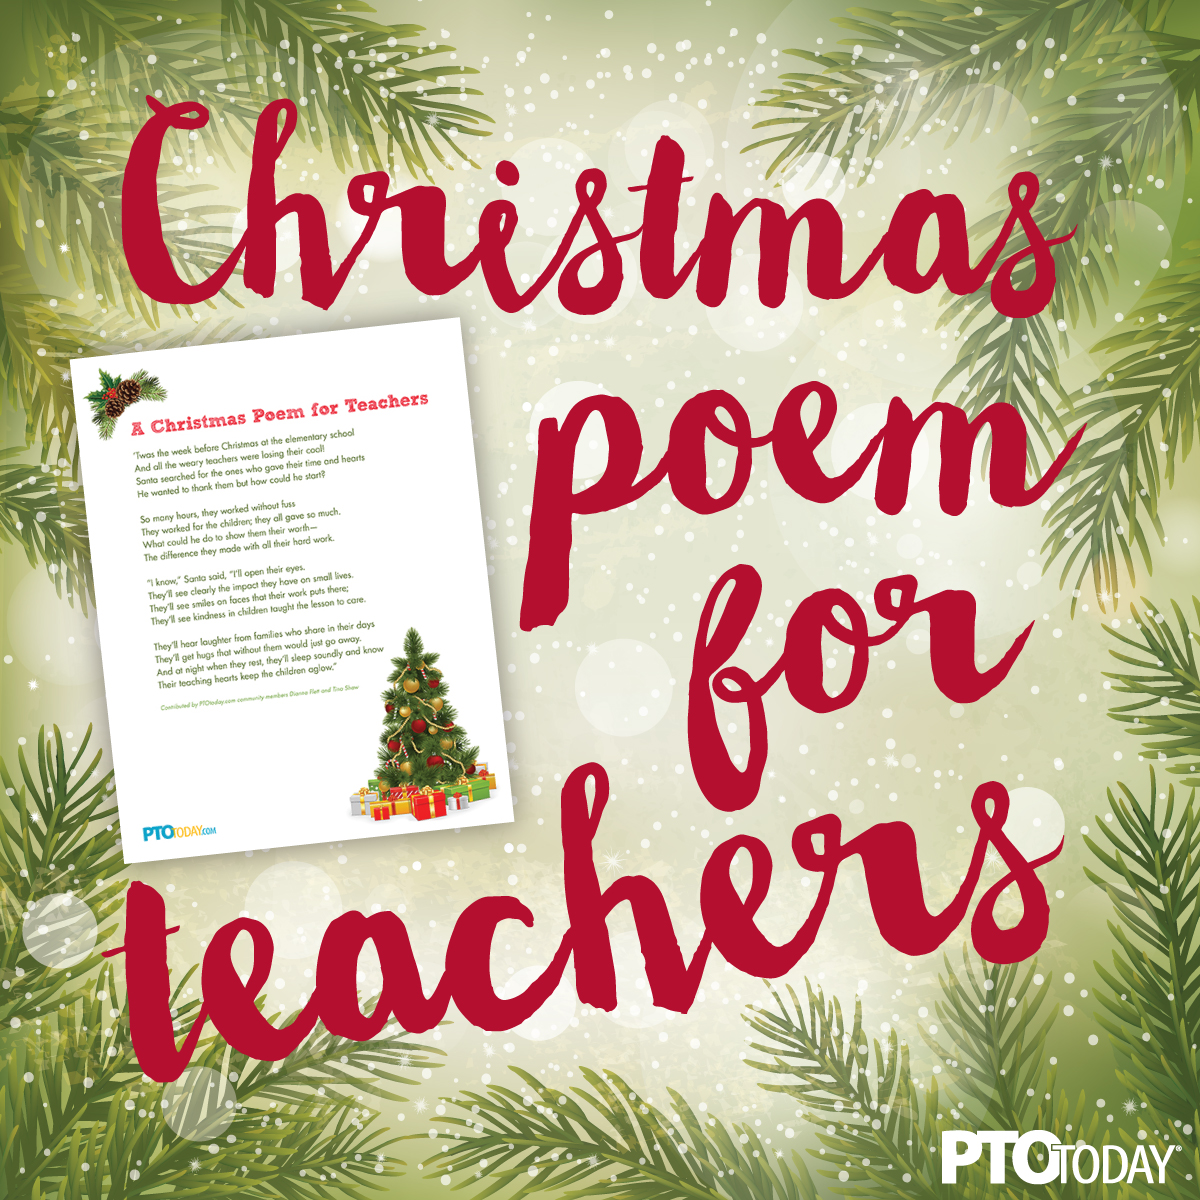 Free Download: Christmas Poem for Teachers